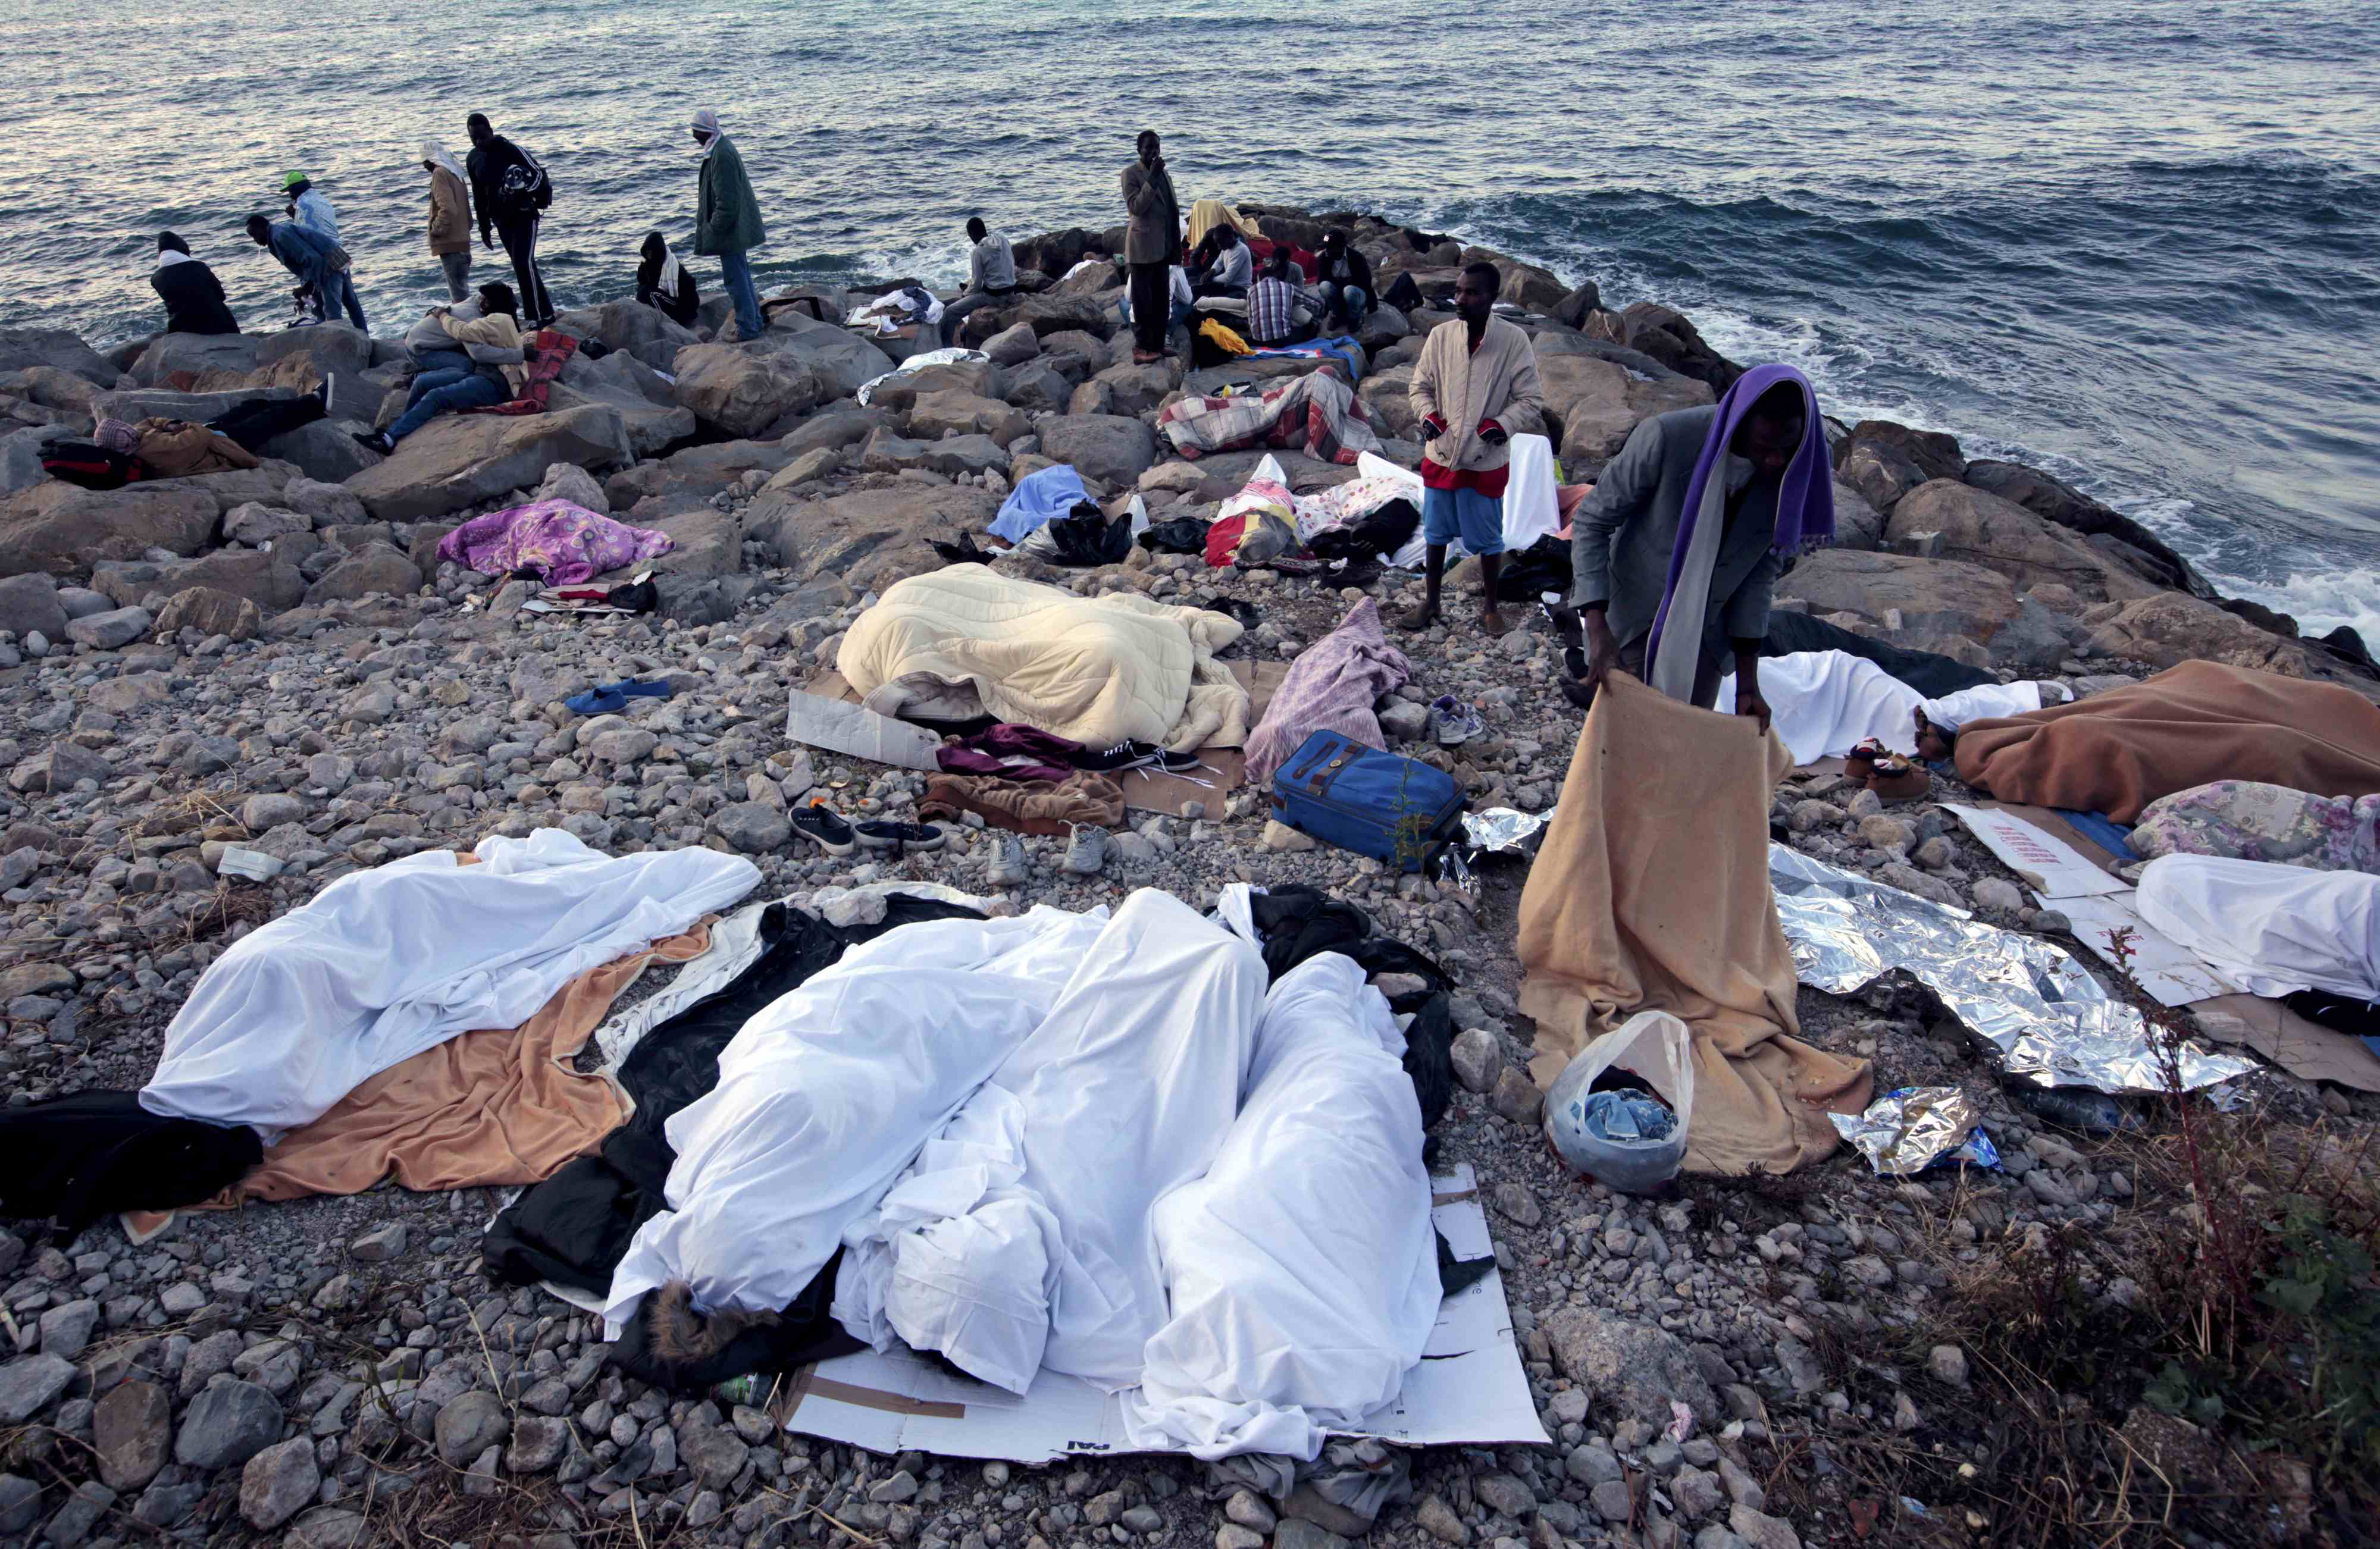 Migrants sleep on the rocks of the seawall at the Saint Ludovic border crossing on the Mediterranean Sea between Vintimille, Italy and Menton, France, June 15, 2015. On Saturday,some 200 migrants, principally from Eritrea and Sudan, attempted to cross the border from Italy and were blocked by Italian police and French gendarmes. REUTERS/Eric Gaillard TPX IMAGES OF THE DAY